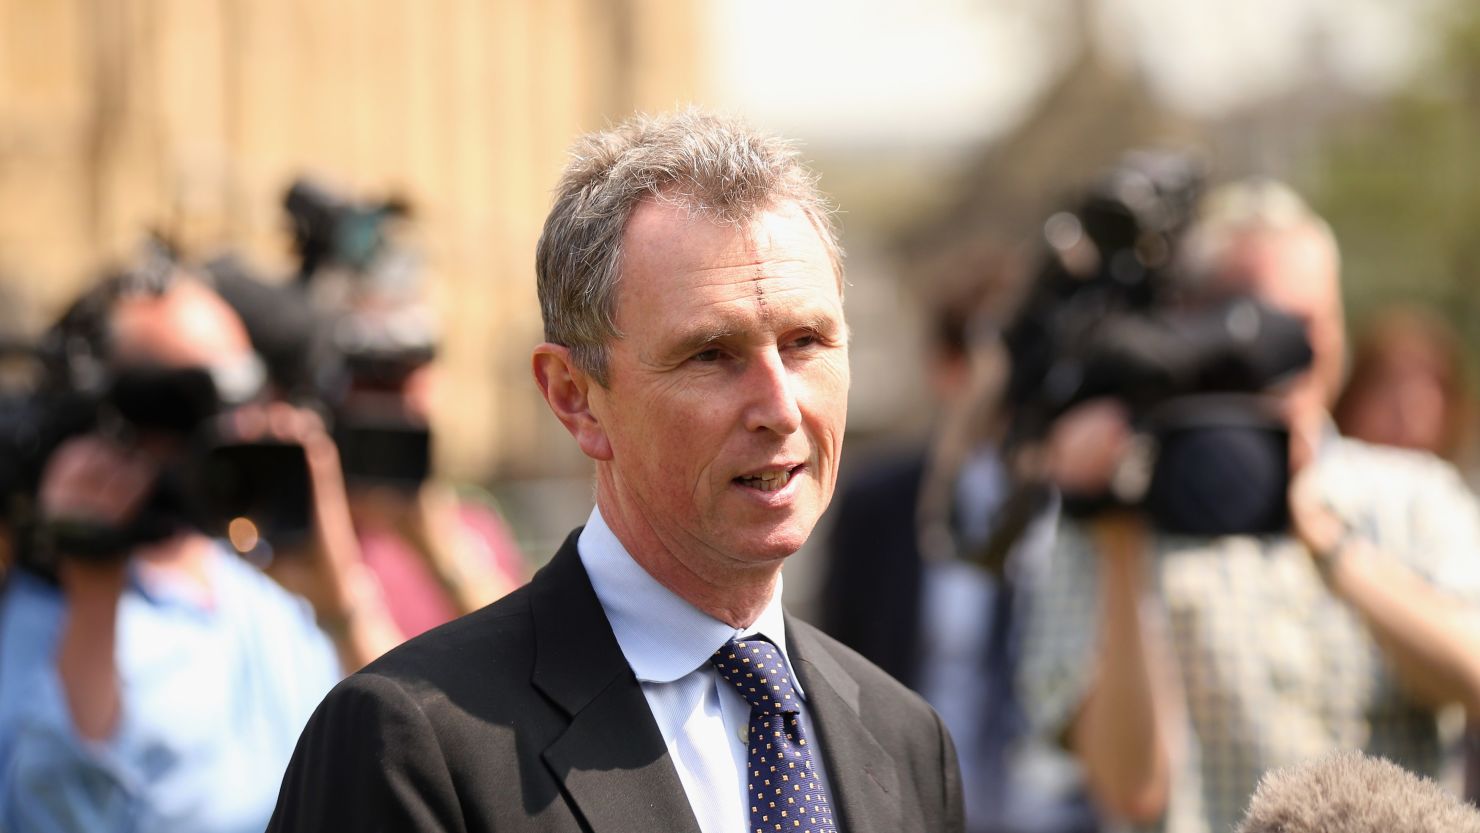 Nigel Evans (pictured in May this year) has been a member of Britain's Parliament since 1992.